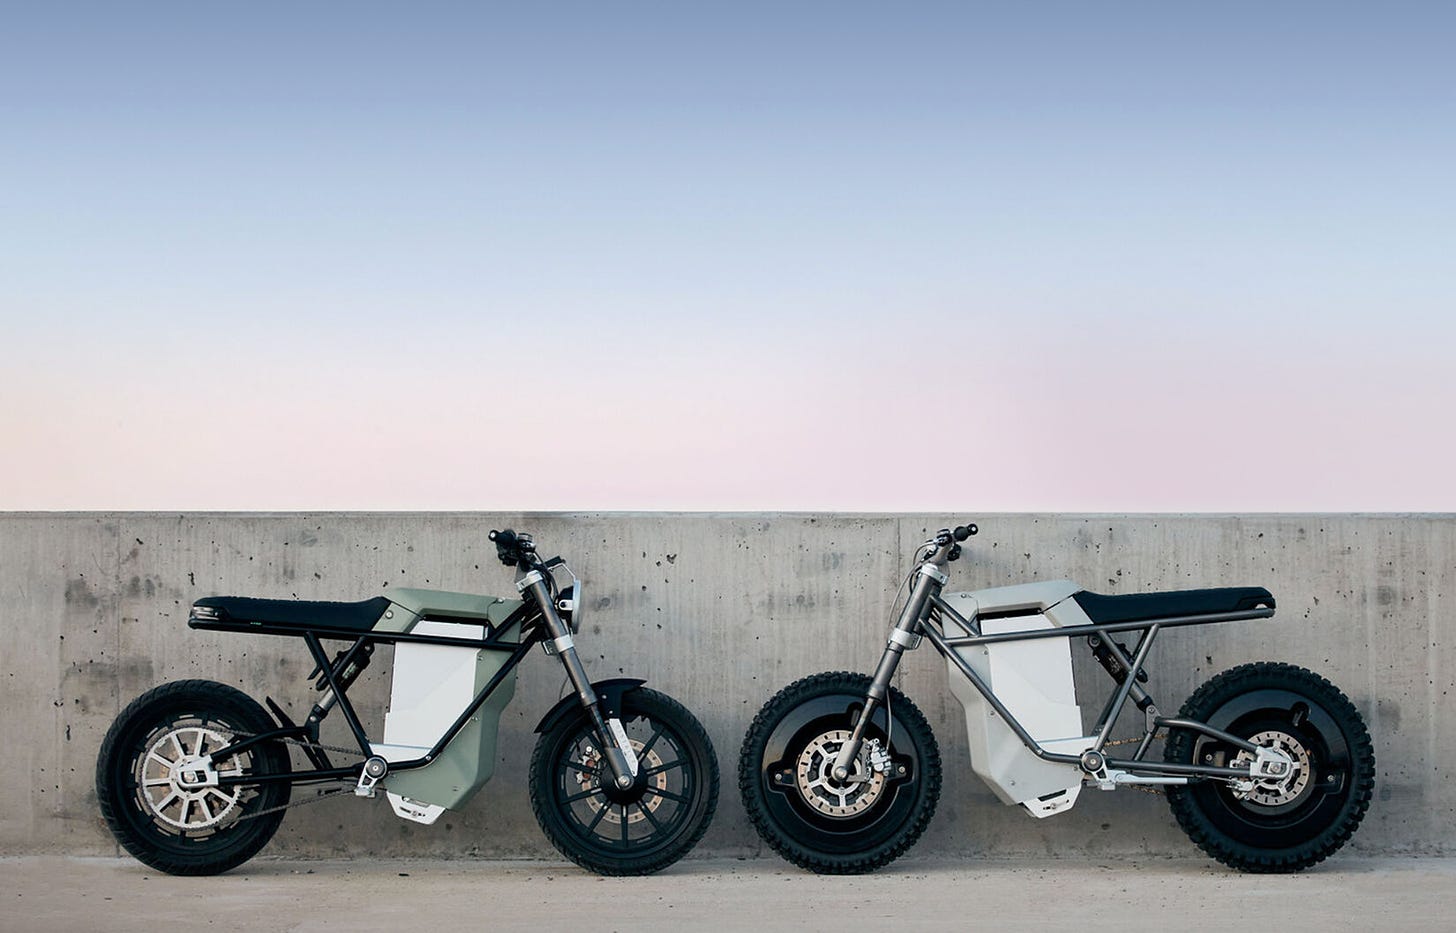 Land Moto's Electric Motorcycle “District” Enters Production